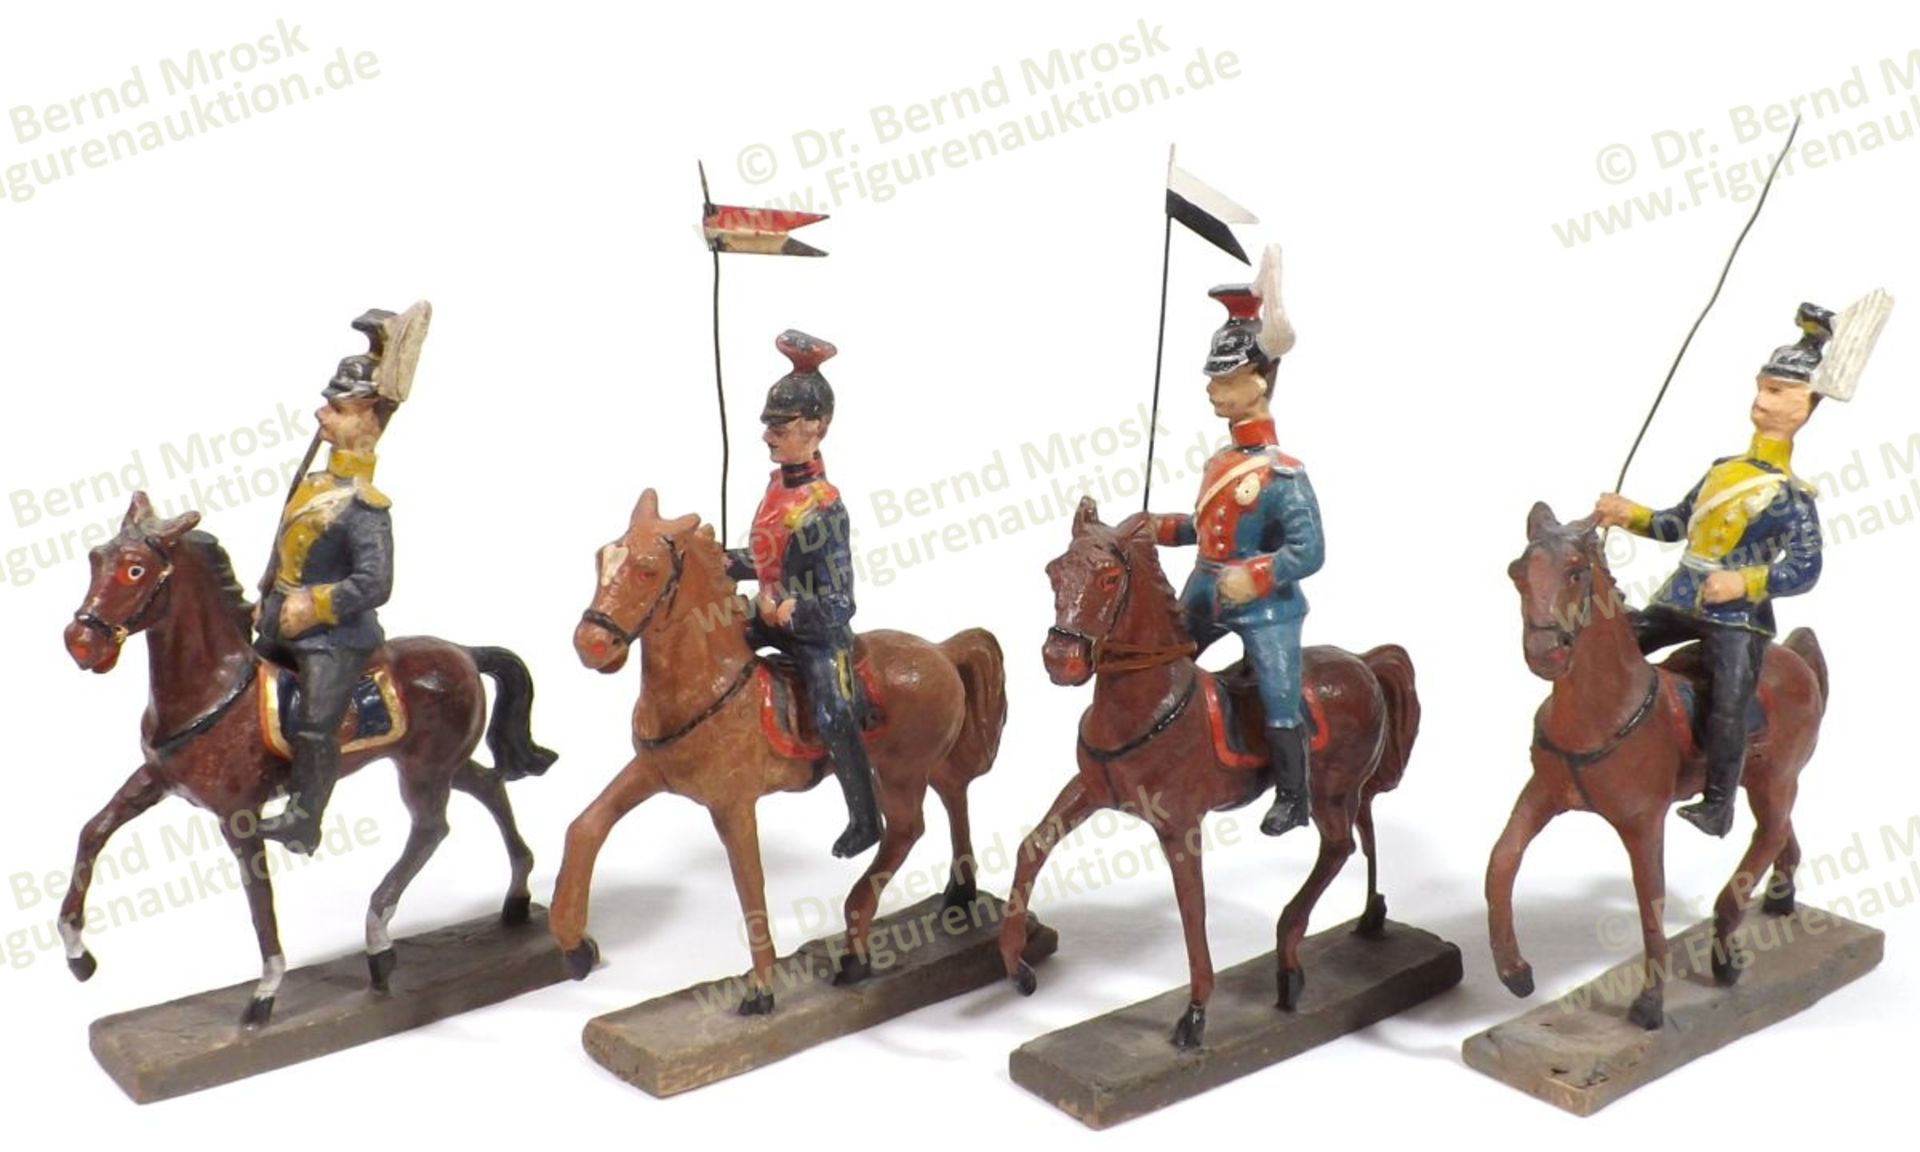 German military, Elastolin, composition figures, 10 cm size, made in Germany probably before 1915